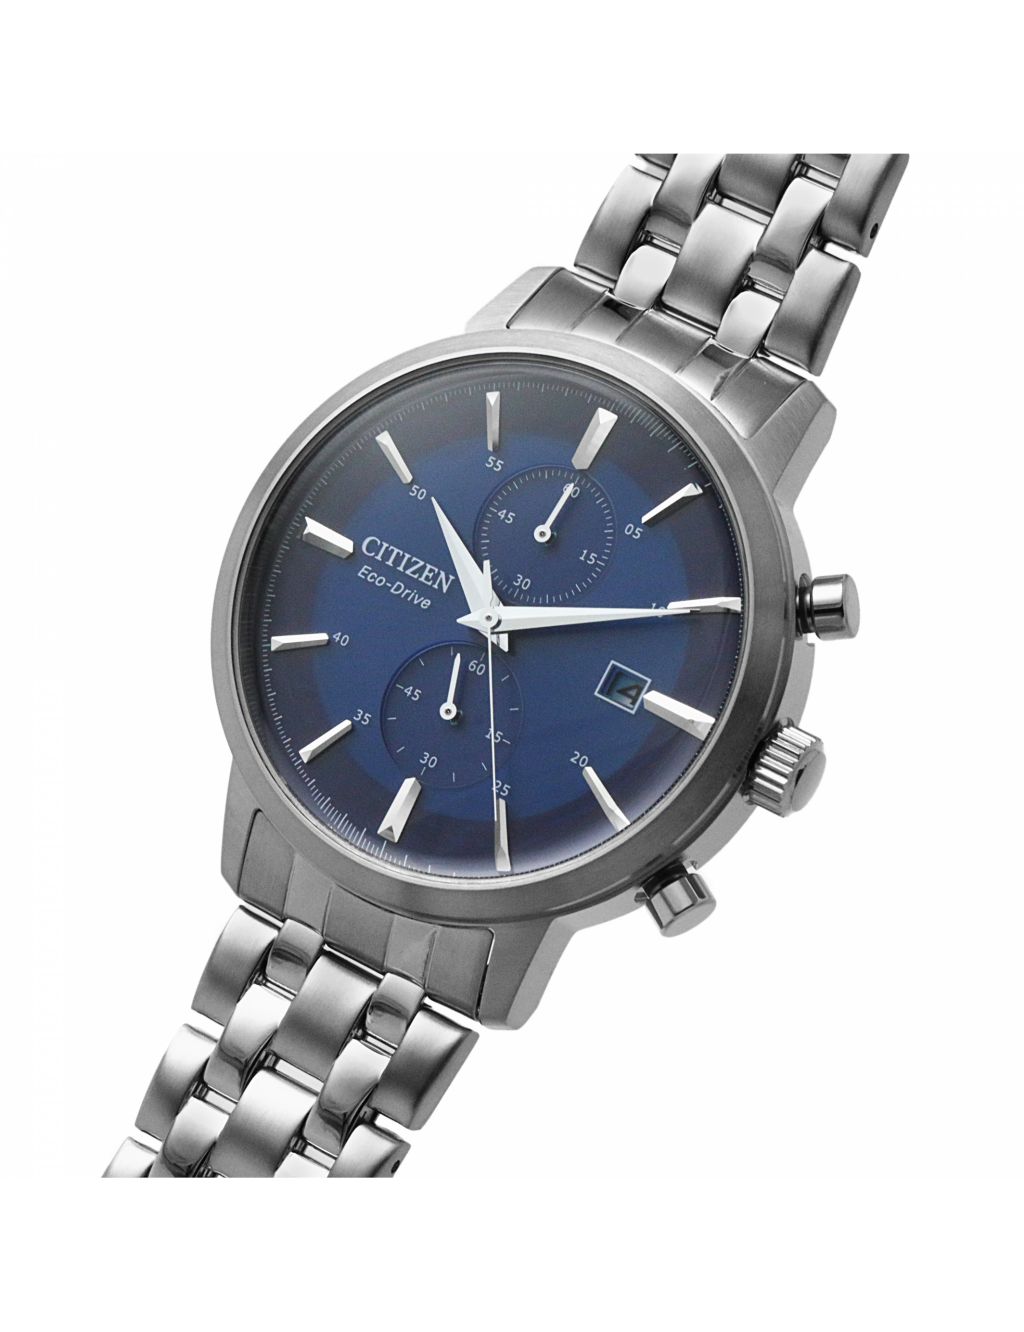 Citizen Twin Eye Stainless Steel Chronograph Watch image 3